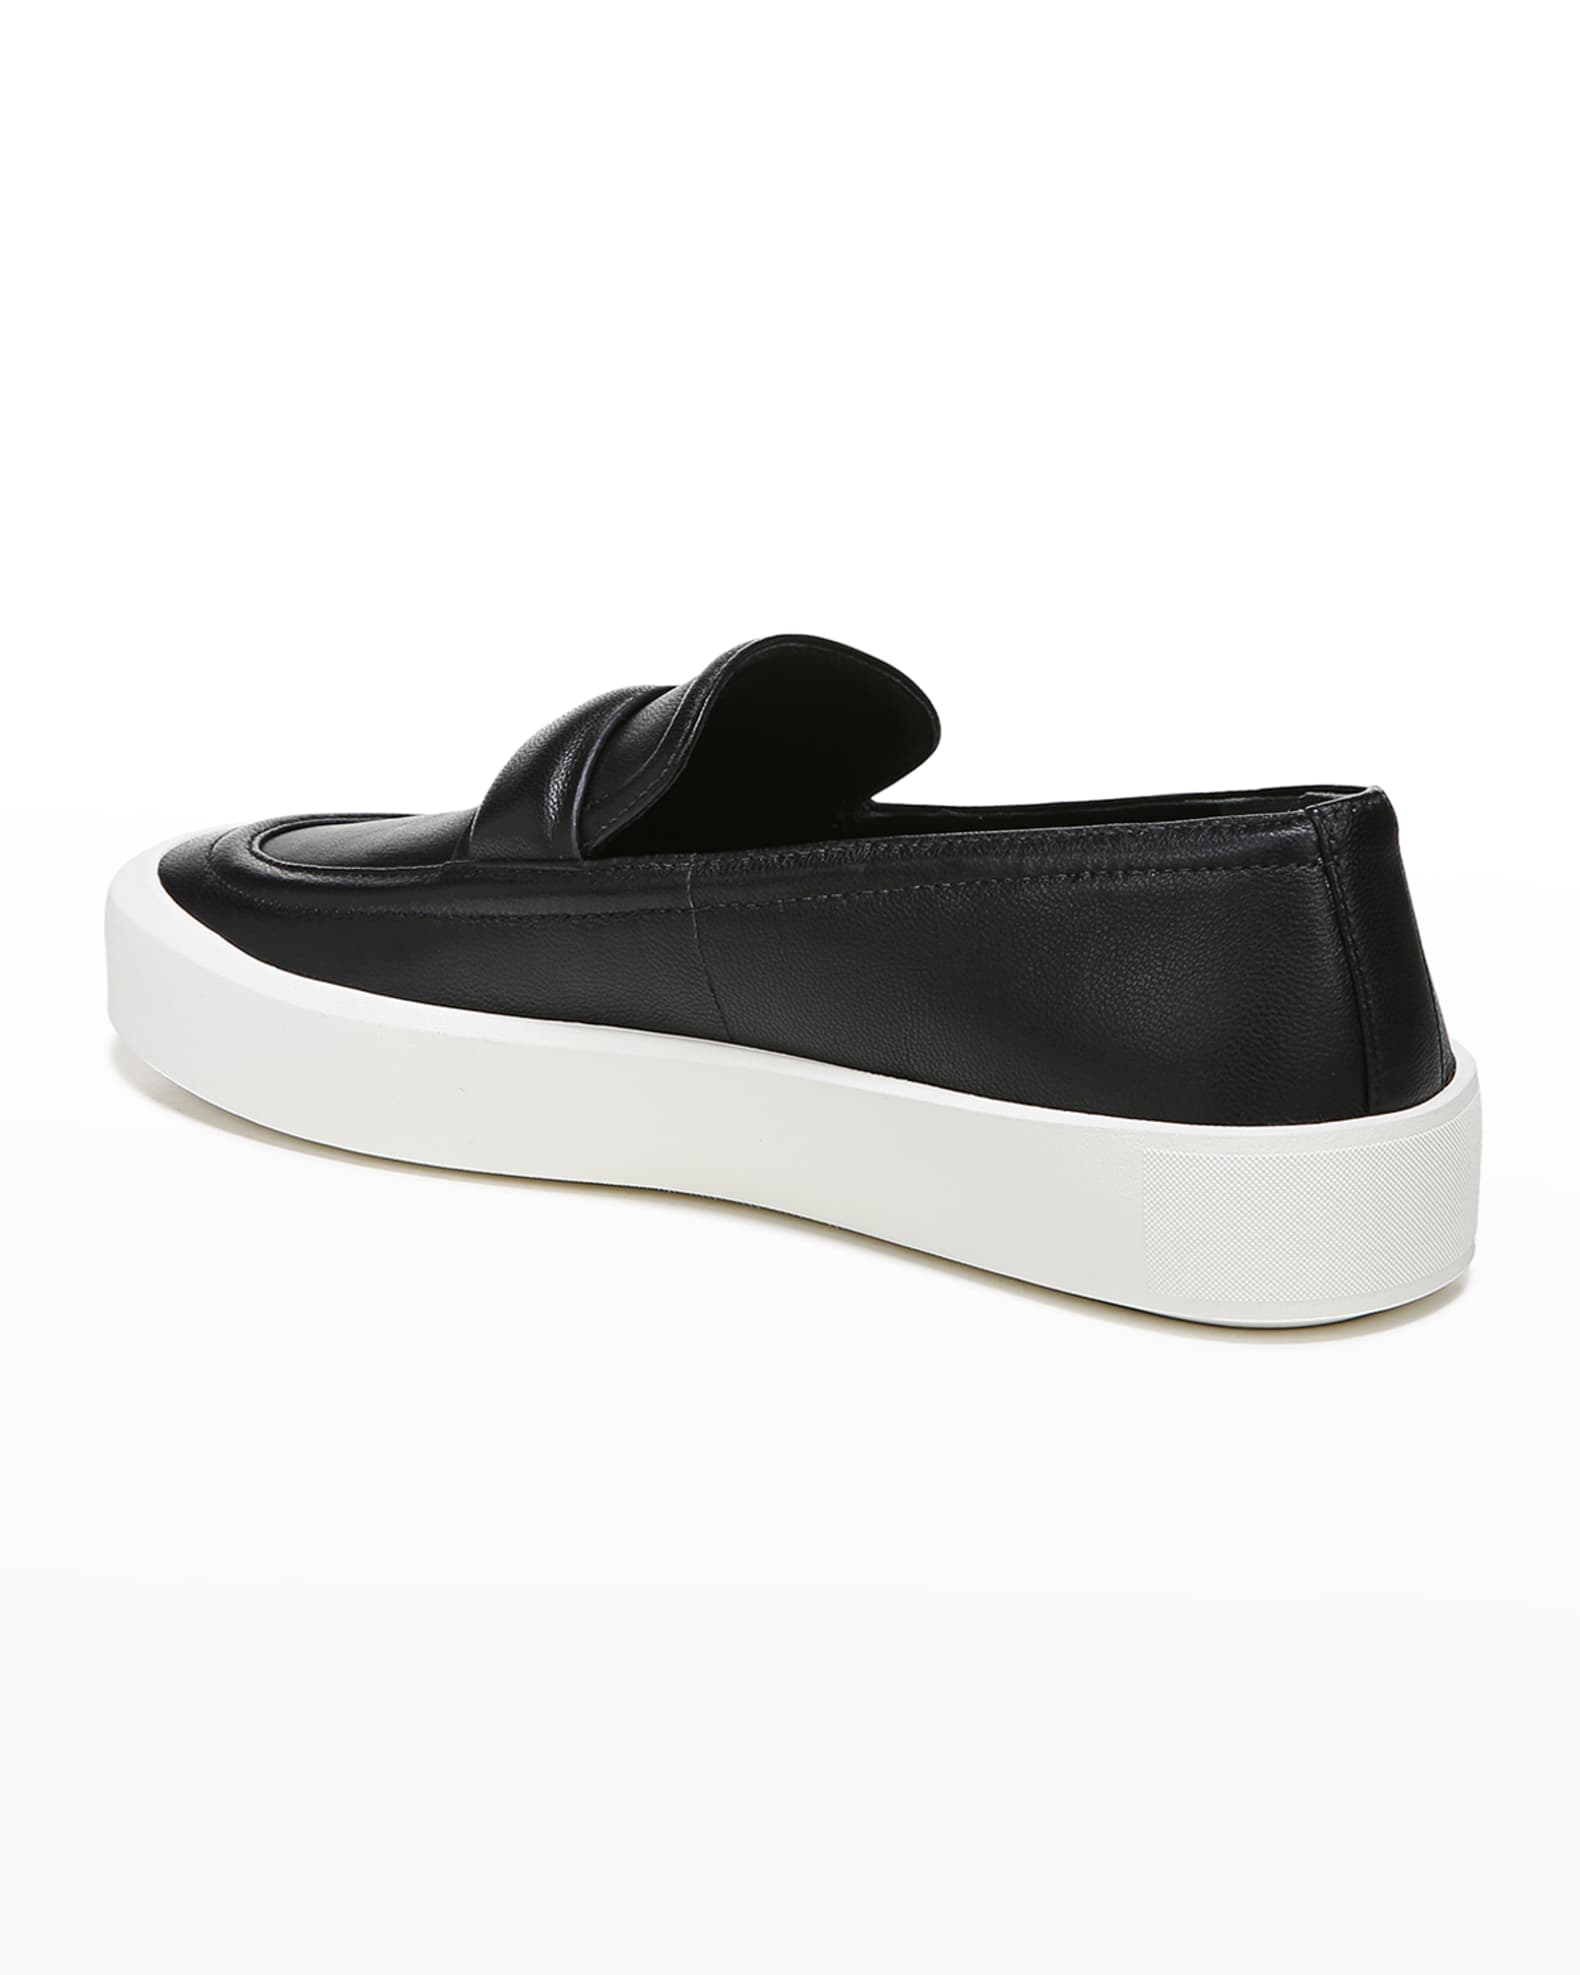 Vince Ghita Leather Slip-On Loafer Sneakers | Neiman Marcus